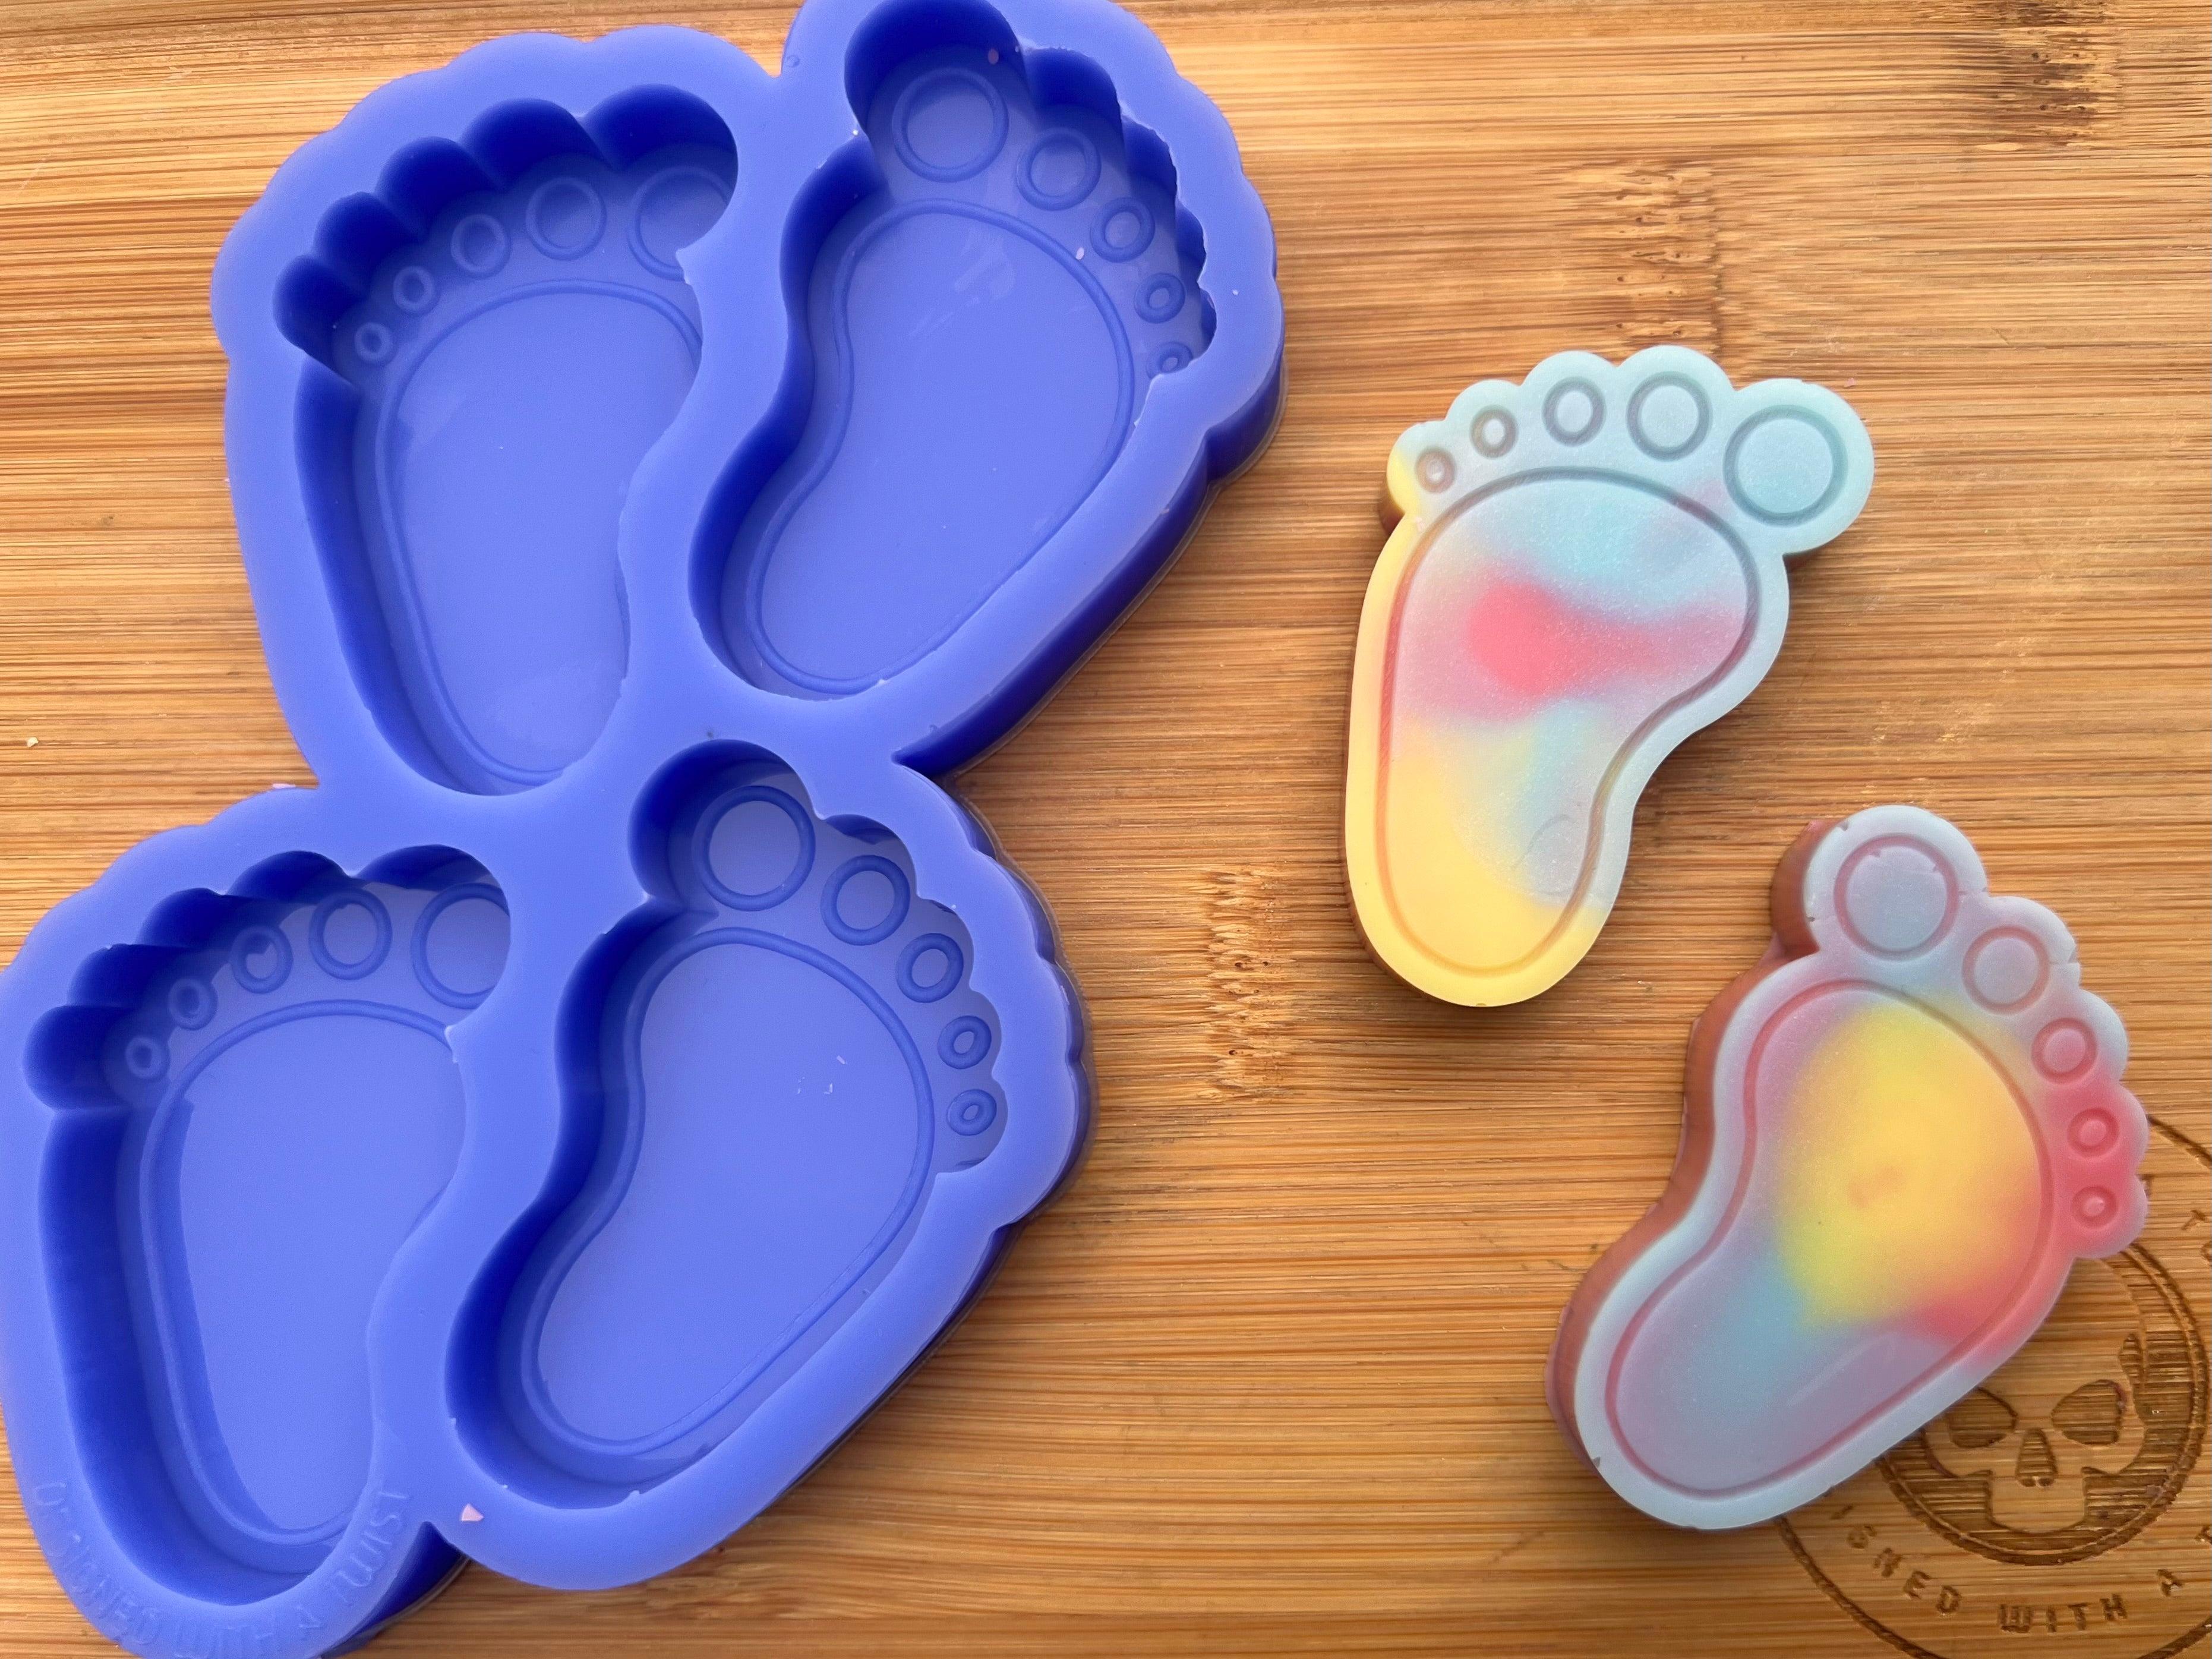 Baby Foot Print Wax Melt Silicone Mold - Designed with a Twist - Top quality silicone molds made in the UK.